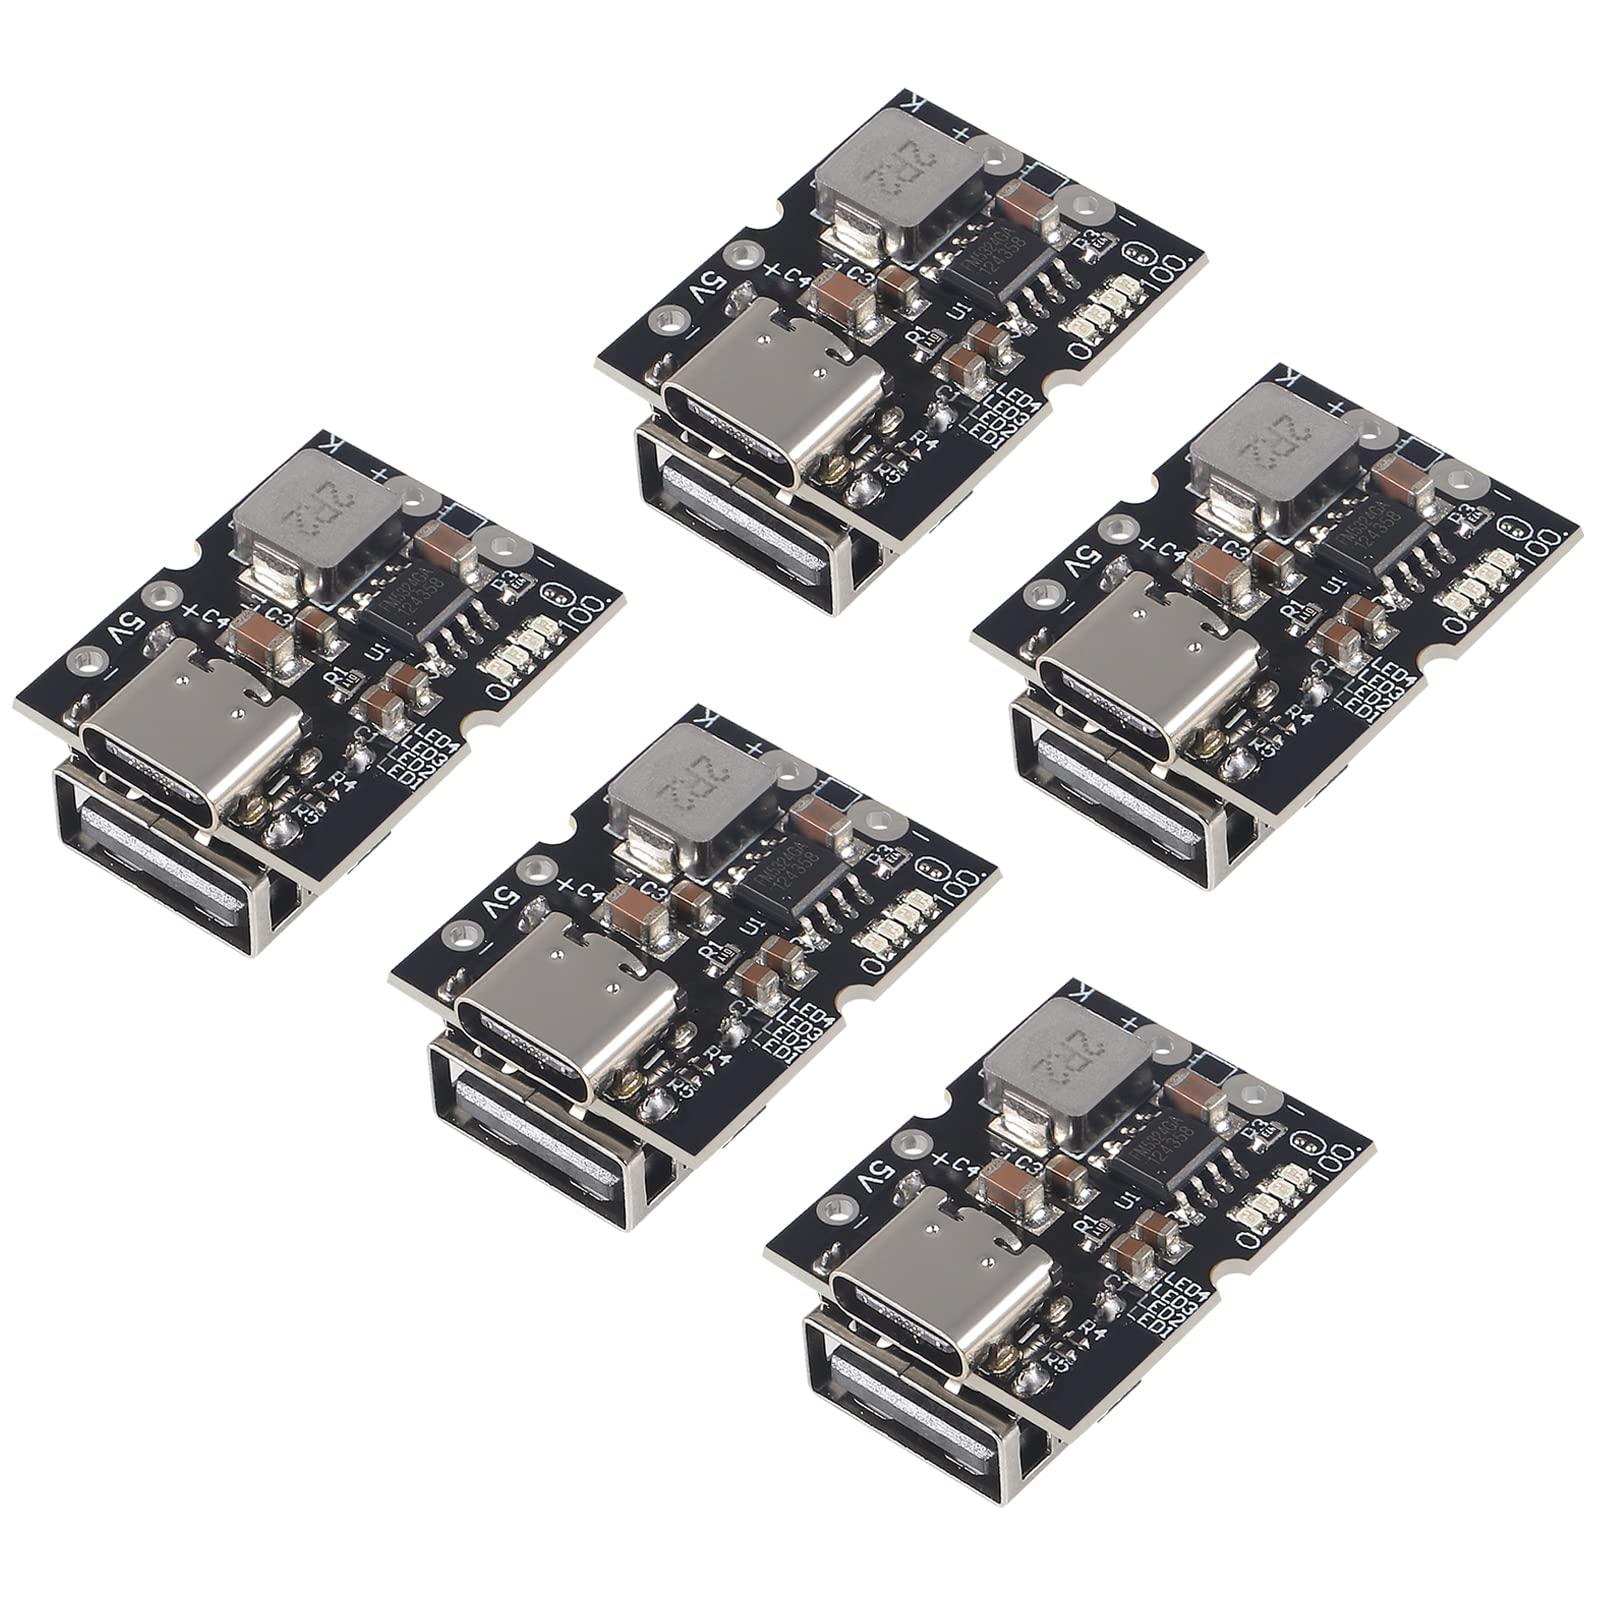 d-flife 5pcs type-c usb 5v 2a boost converter step-up power module lithium battery charging protection board display usb for 